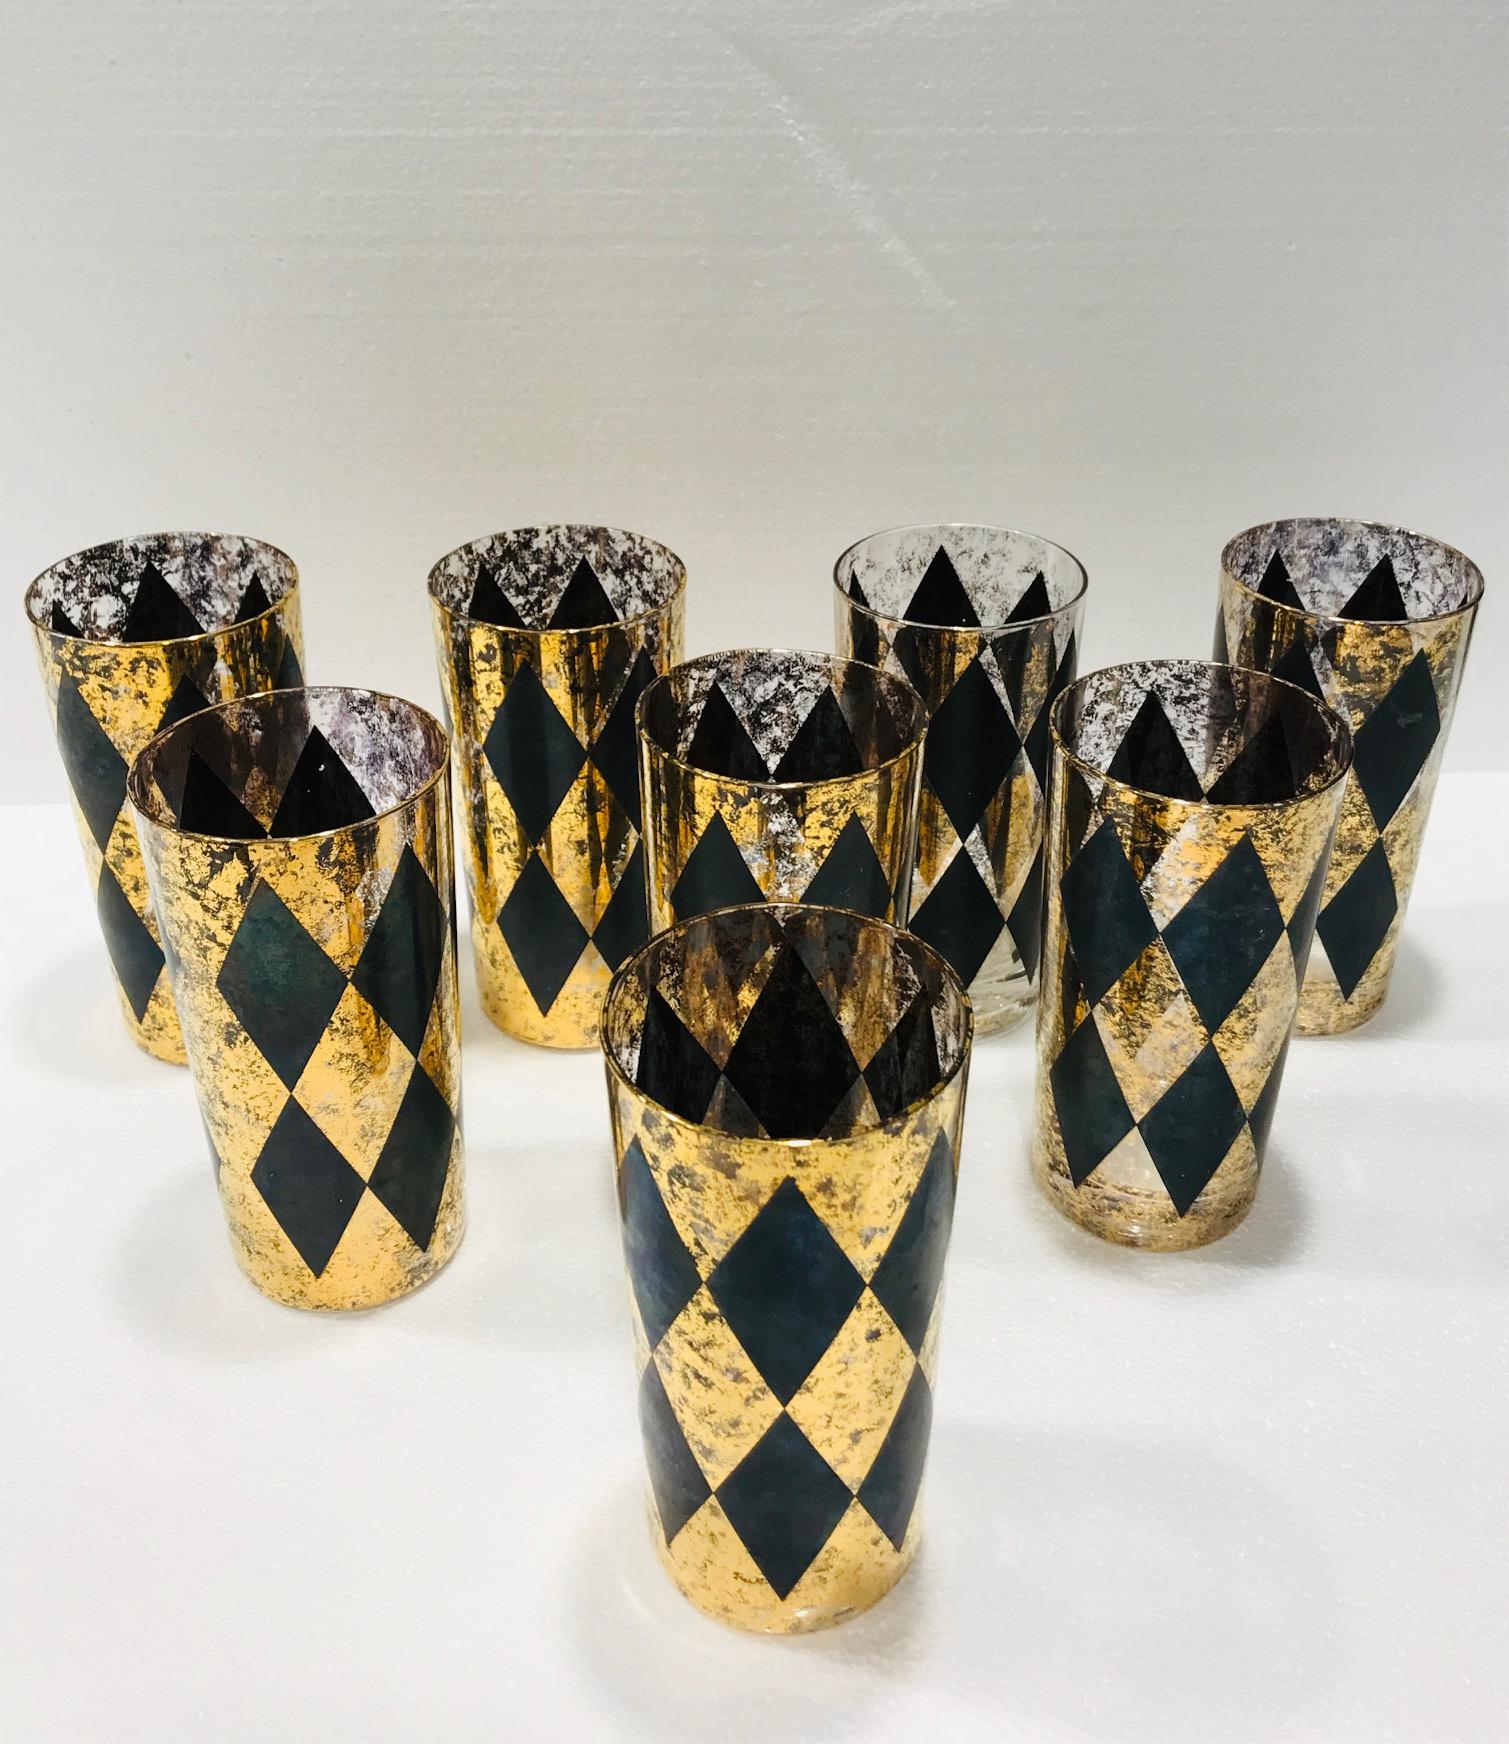 Set of eight Mid-Century Modern highball glasses with Harlequin design. Tall cocktail glasses featuring hand blown design with 22-karat gold leaf flecks and black diamond pattern throughout. Hollywood Regency set makes a chic addition to your